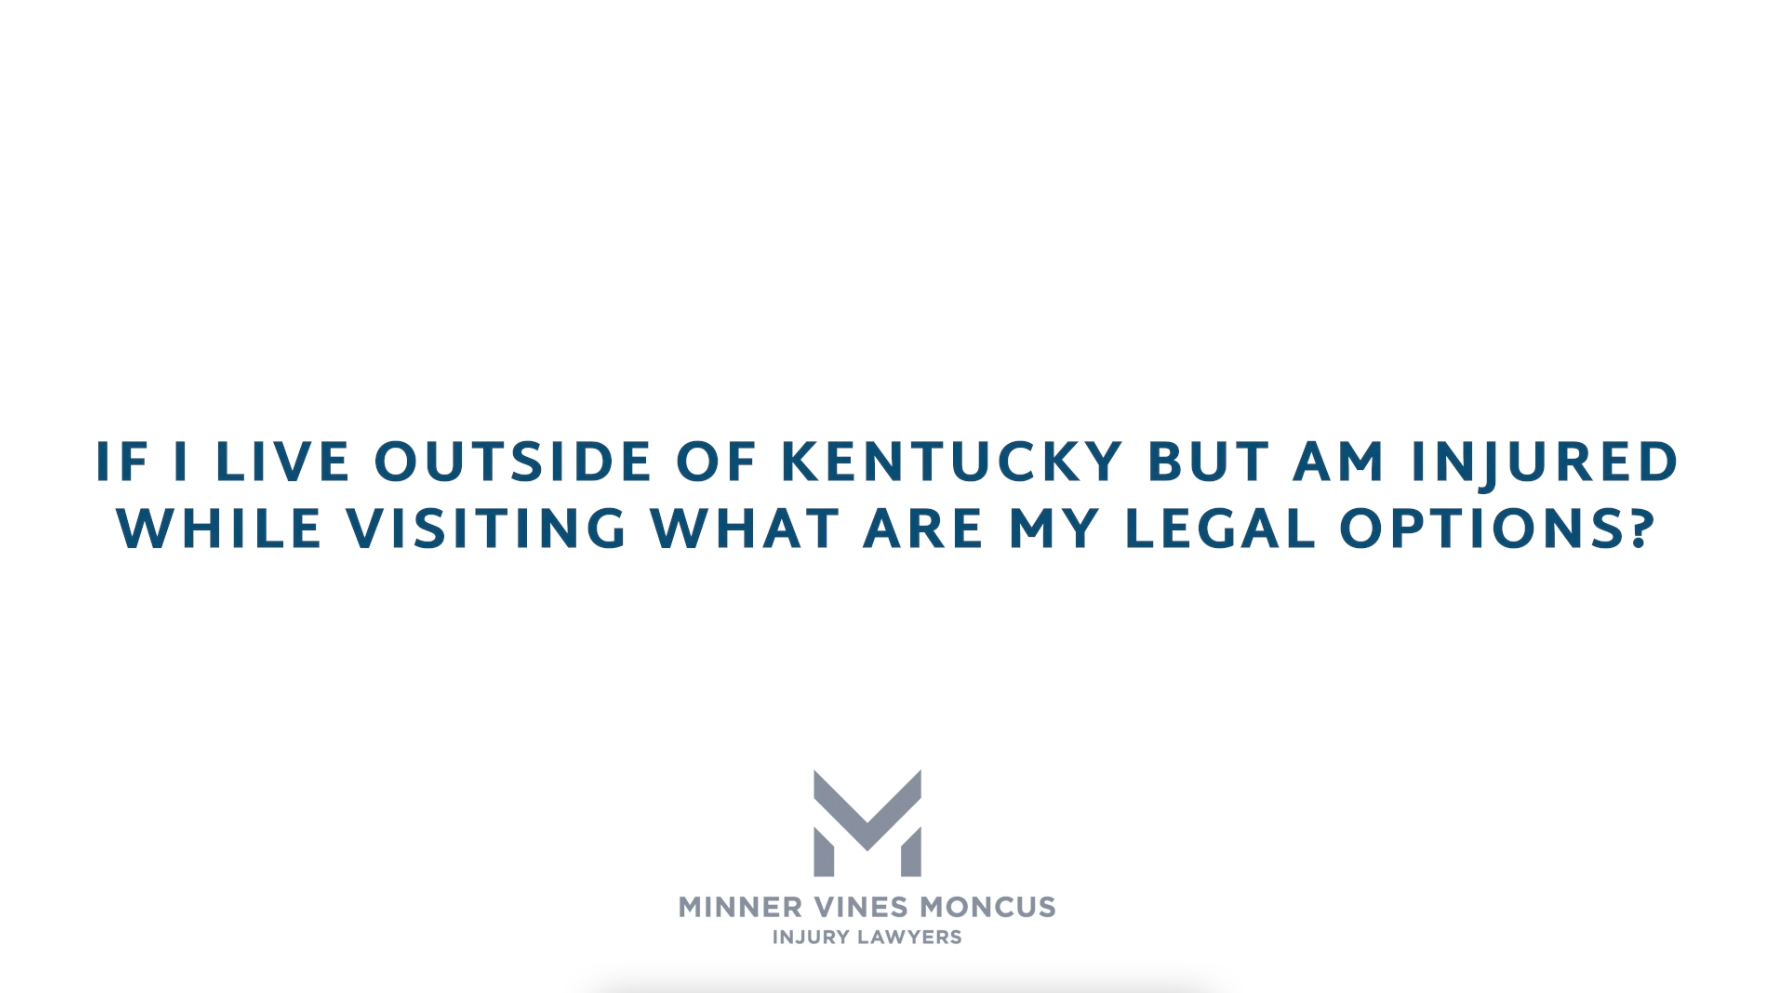 If I live outside of Kentucky but am injured while visiting what are my legal options?